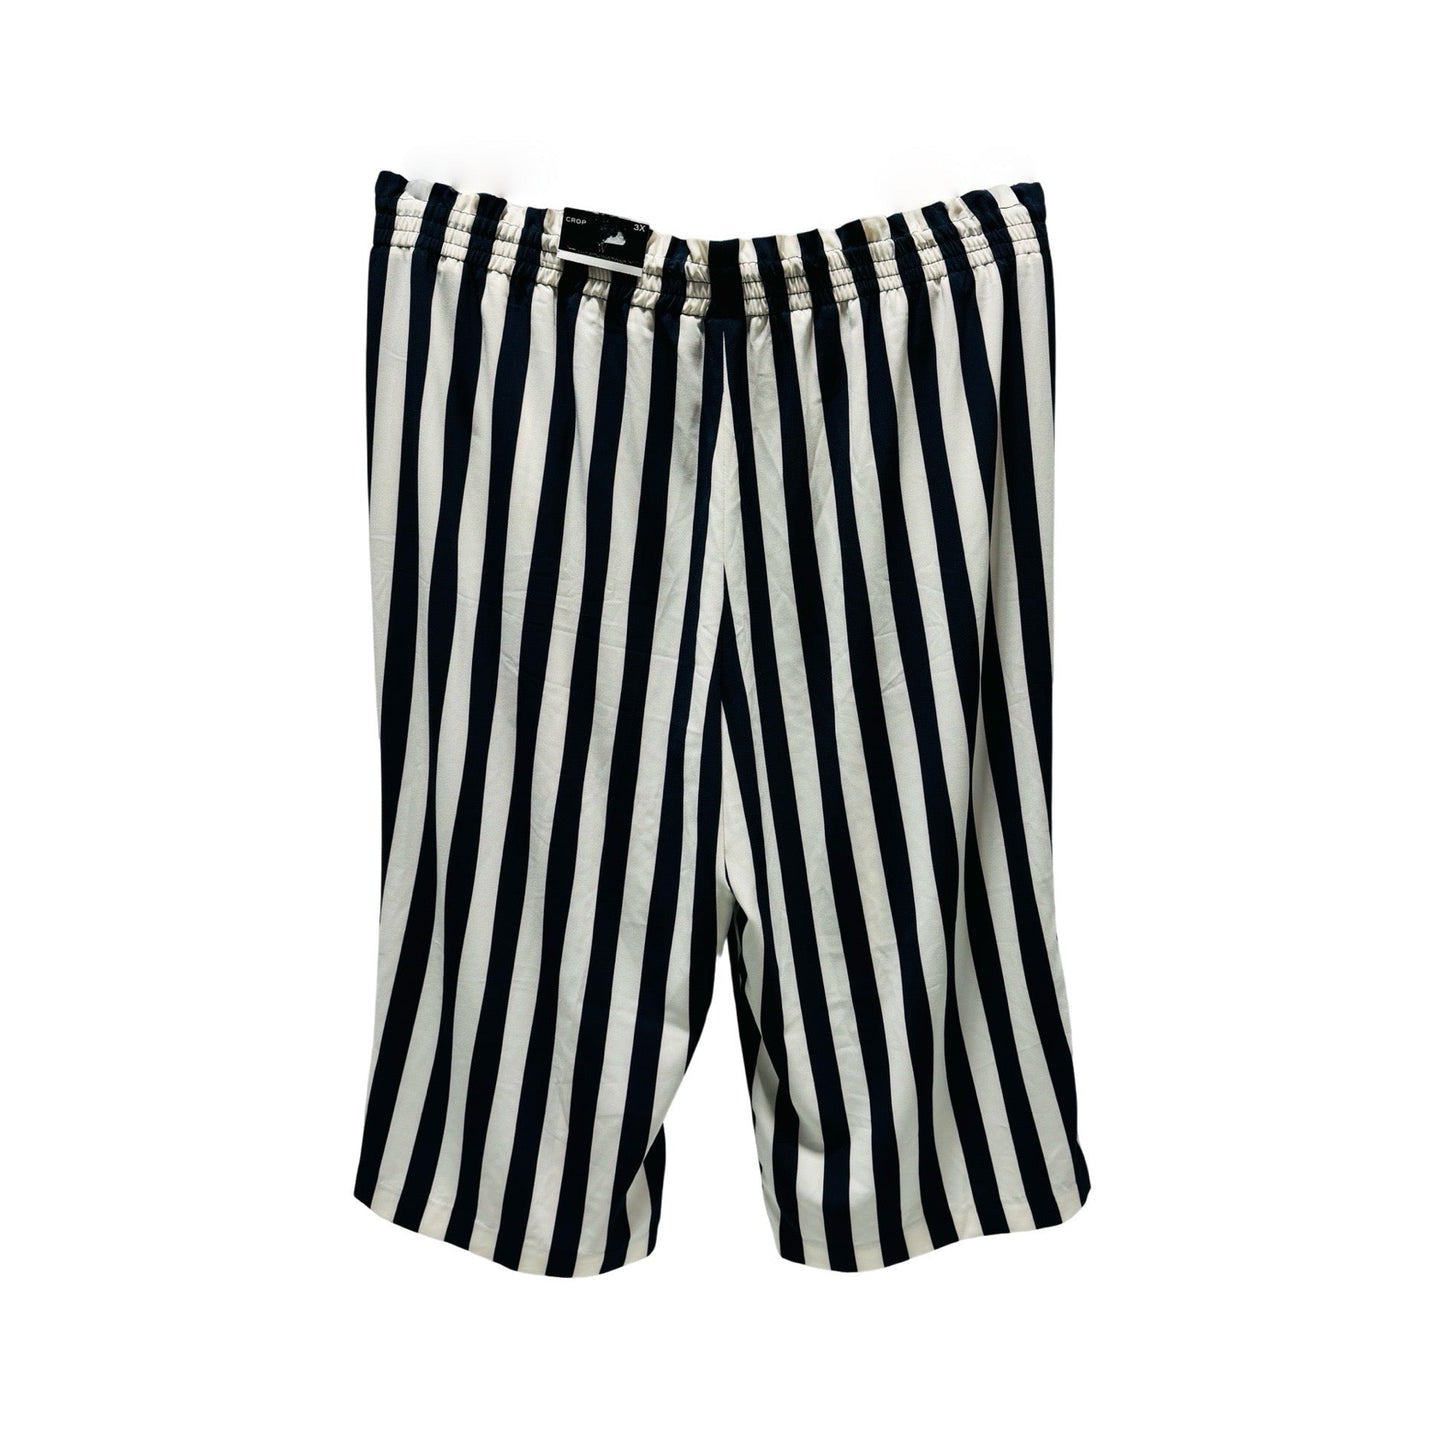 NWT Navy & White Striped Pants Cropped By Worthington  Size: 3X